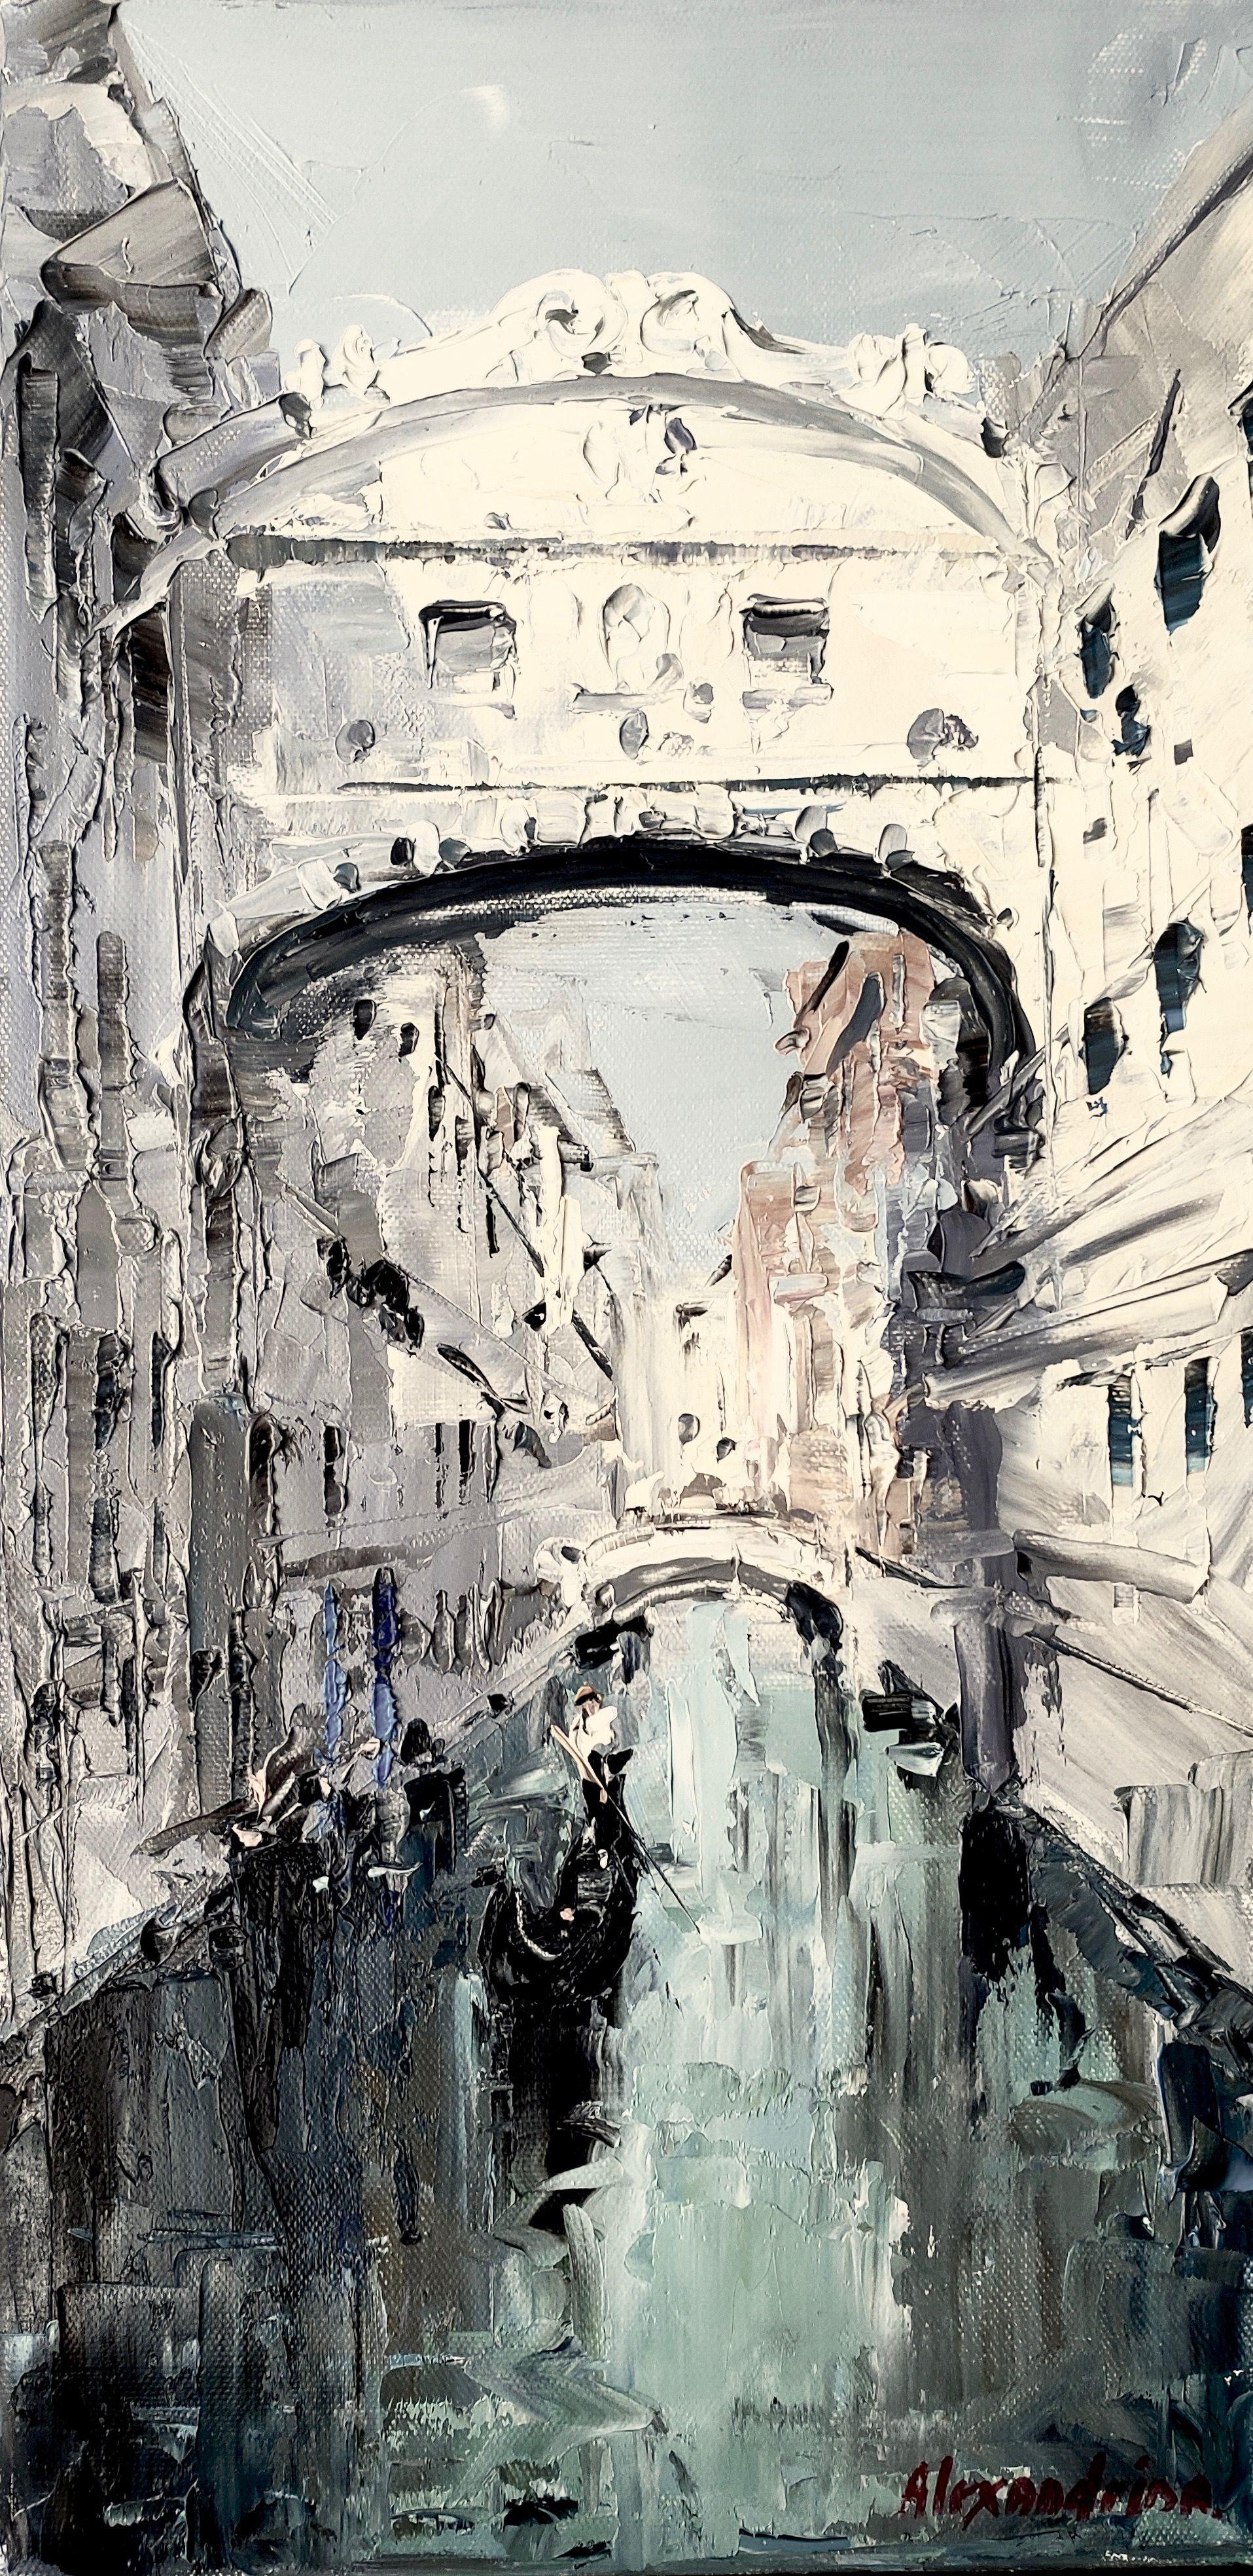 VENICE CANAL. ITALY., Painting, Oil on Canvas